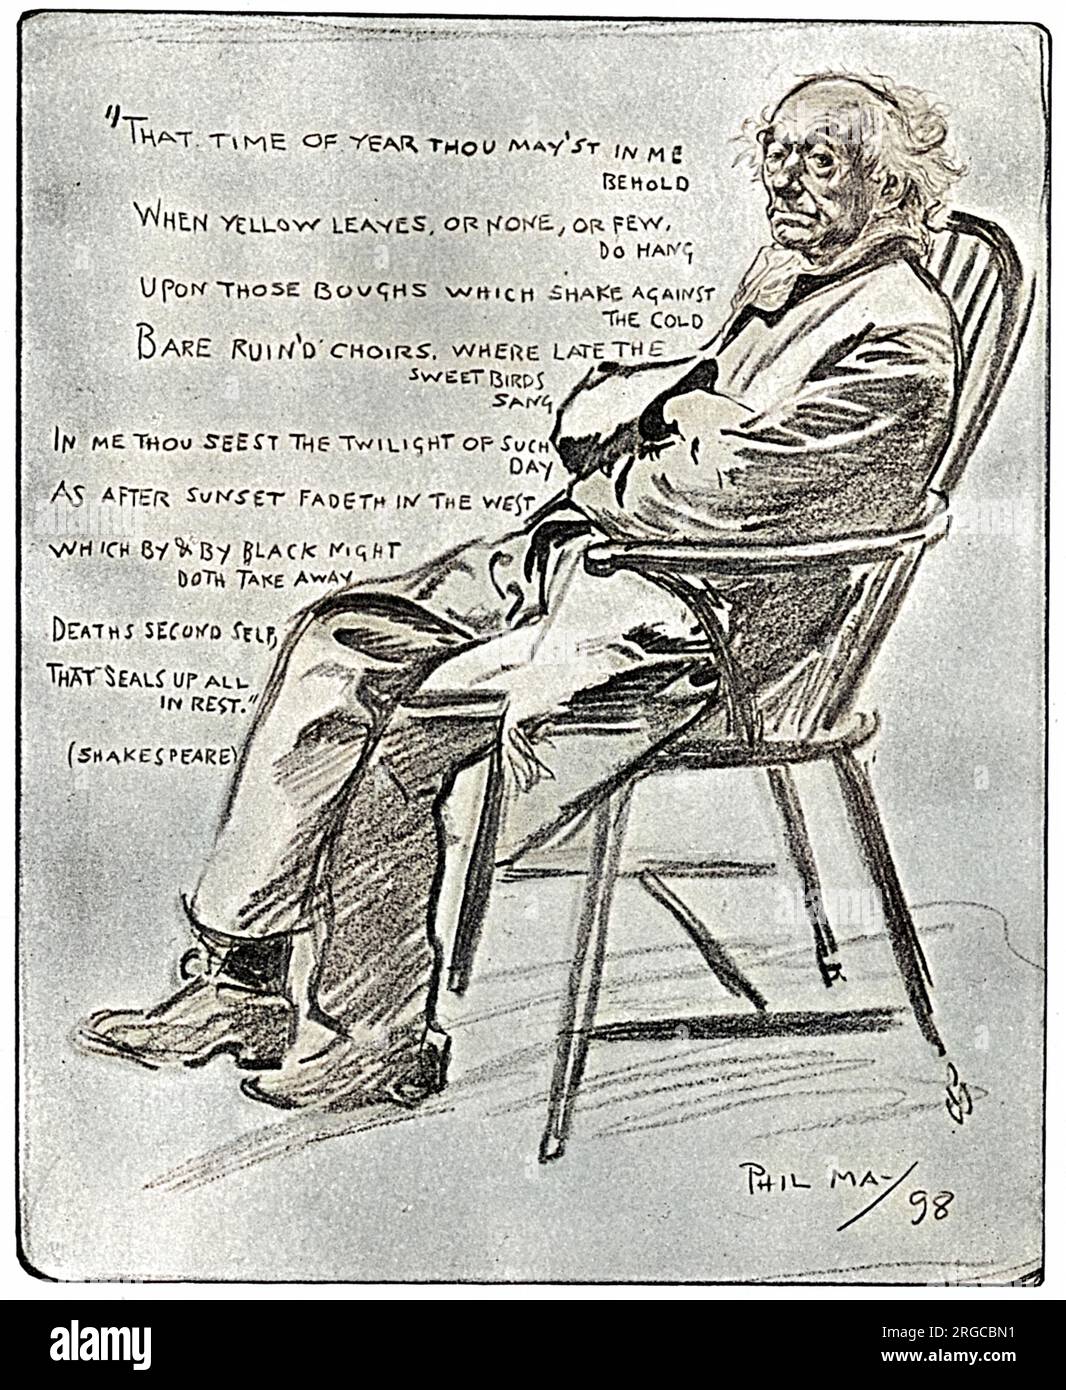 The study of an Old Man in the 'Vale of Years' by Phil May - with associated quotation from Sonnet 73, one of William Shakespeare's most famous sonnets, focusing upon the theme of old age. Stock Photo